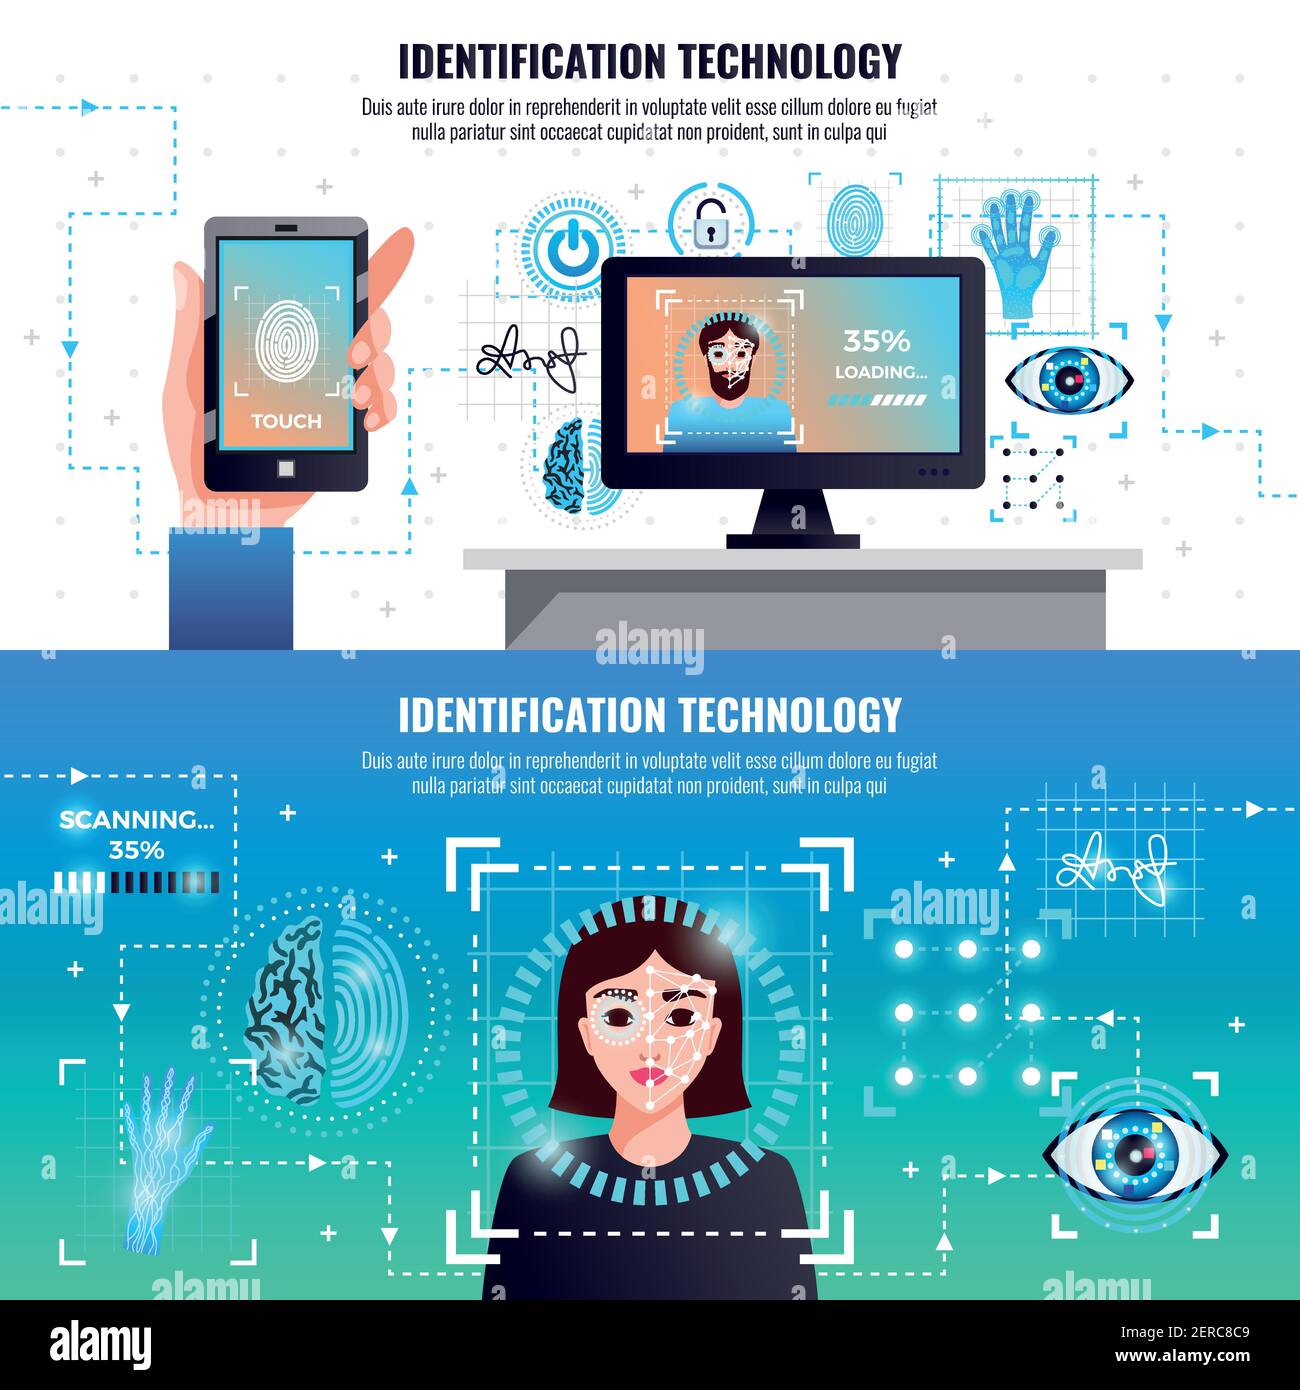 Identification technology 2 infographic elements horizontal banners with face fingerprint signature recognition computer access control vector illustr Stock Vector